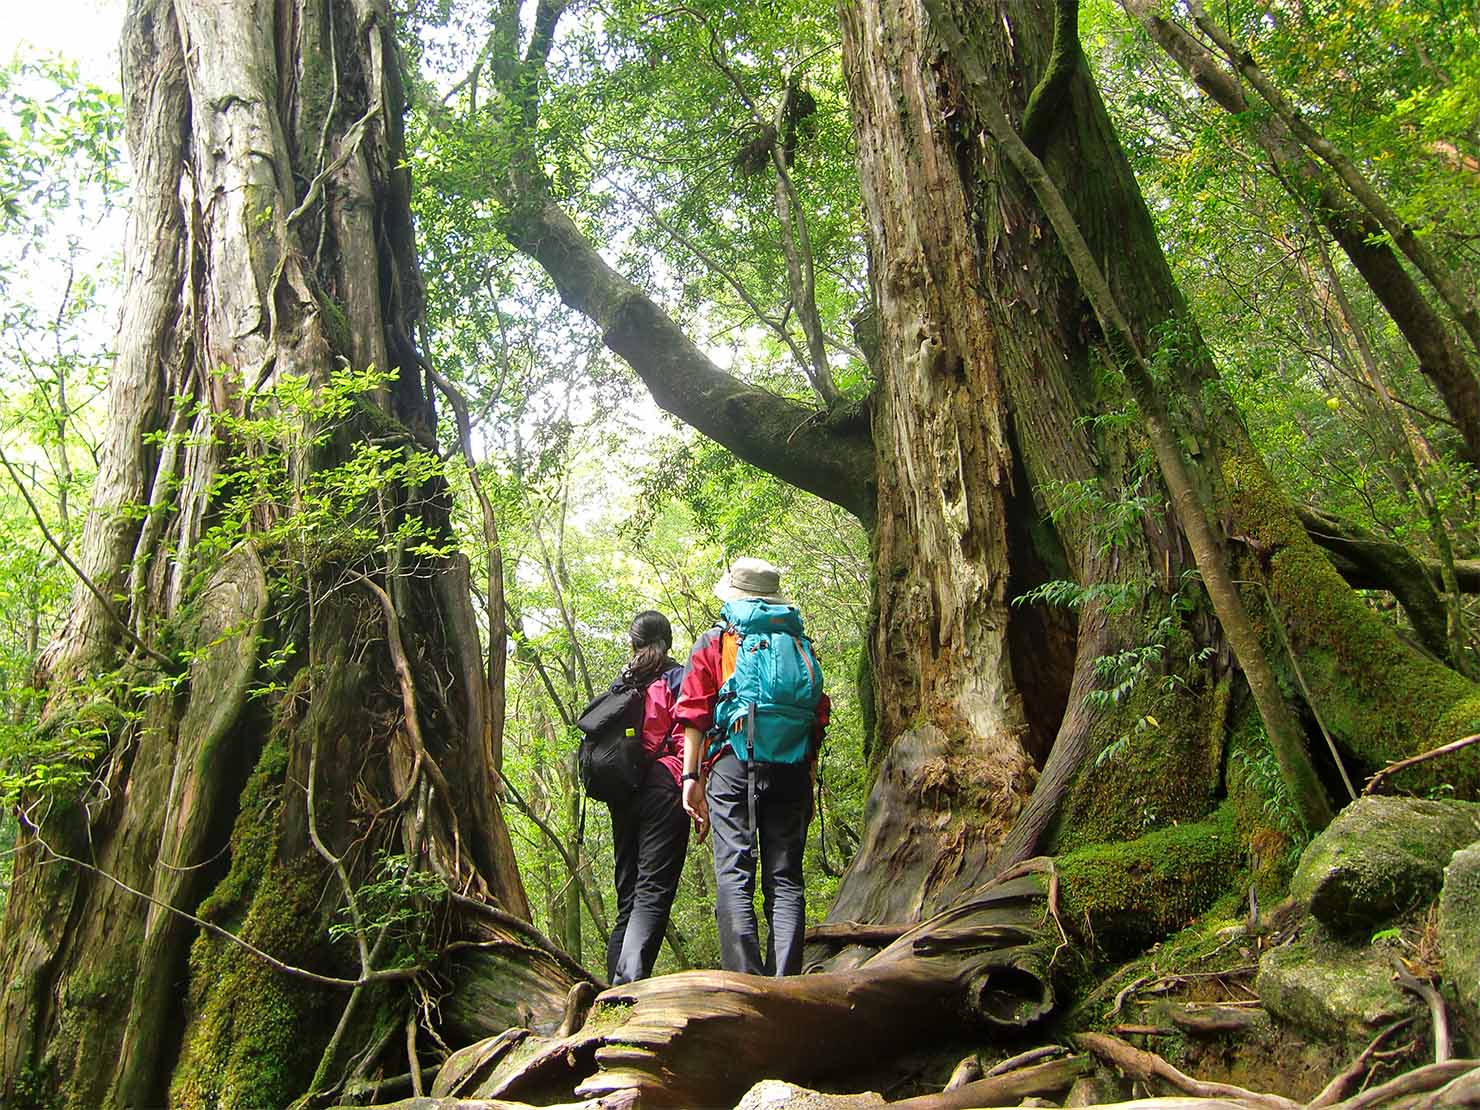 Two hikers stop to view the massive cedar trees on both sides of a trail in the mountains of Yakushima Island.